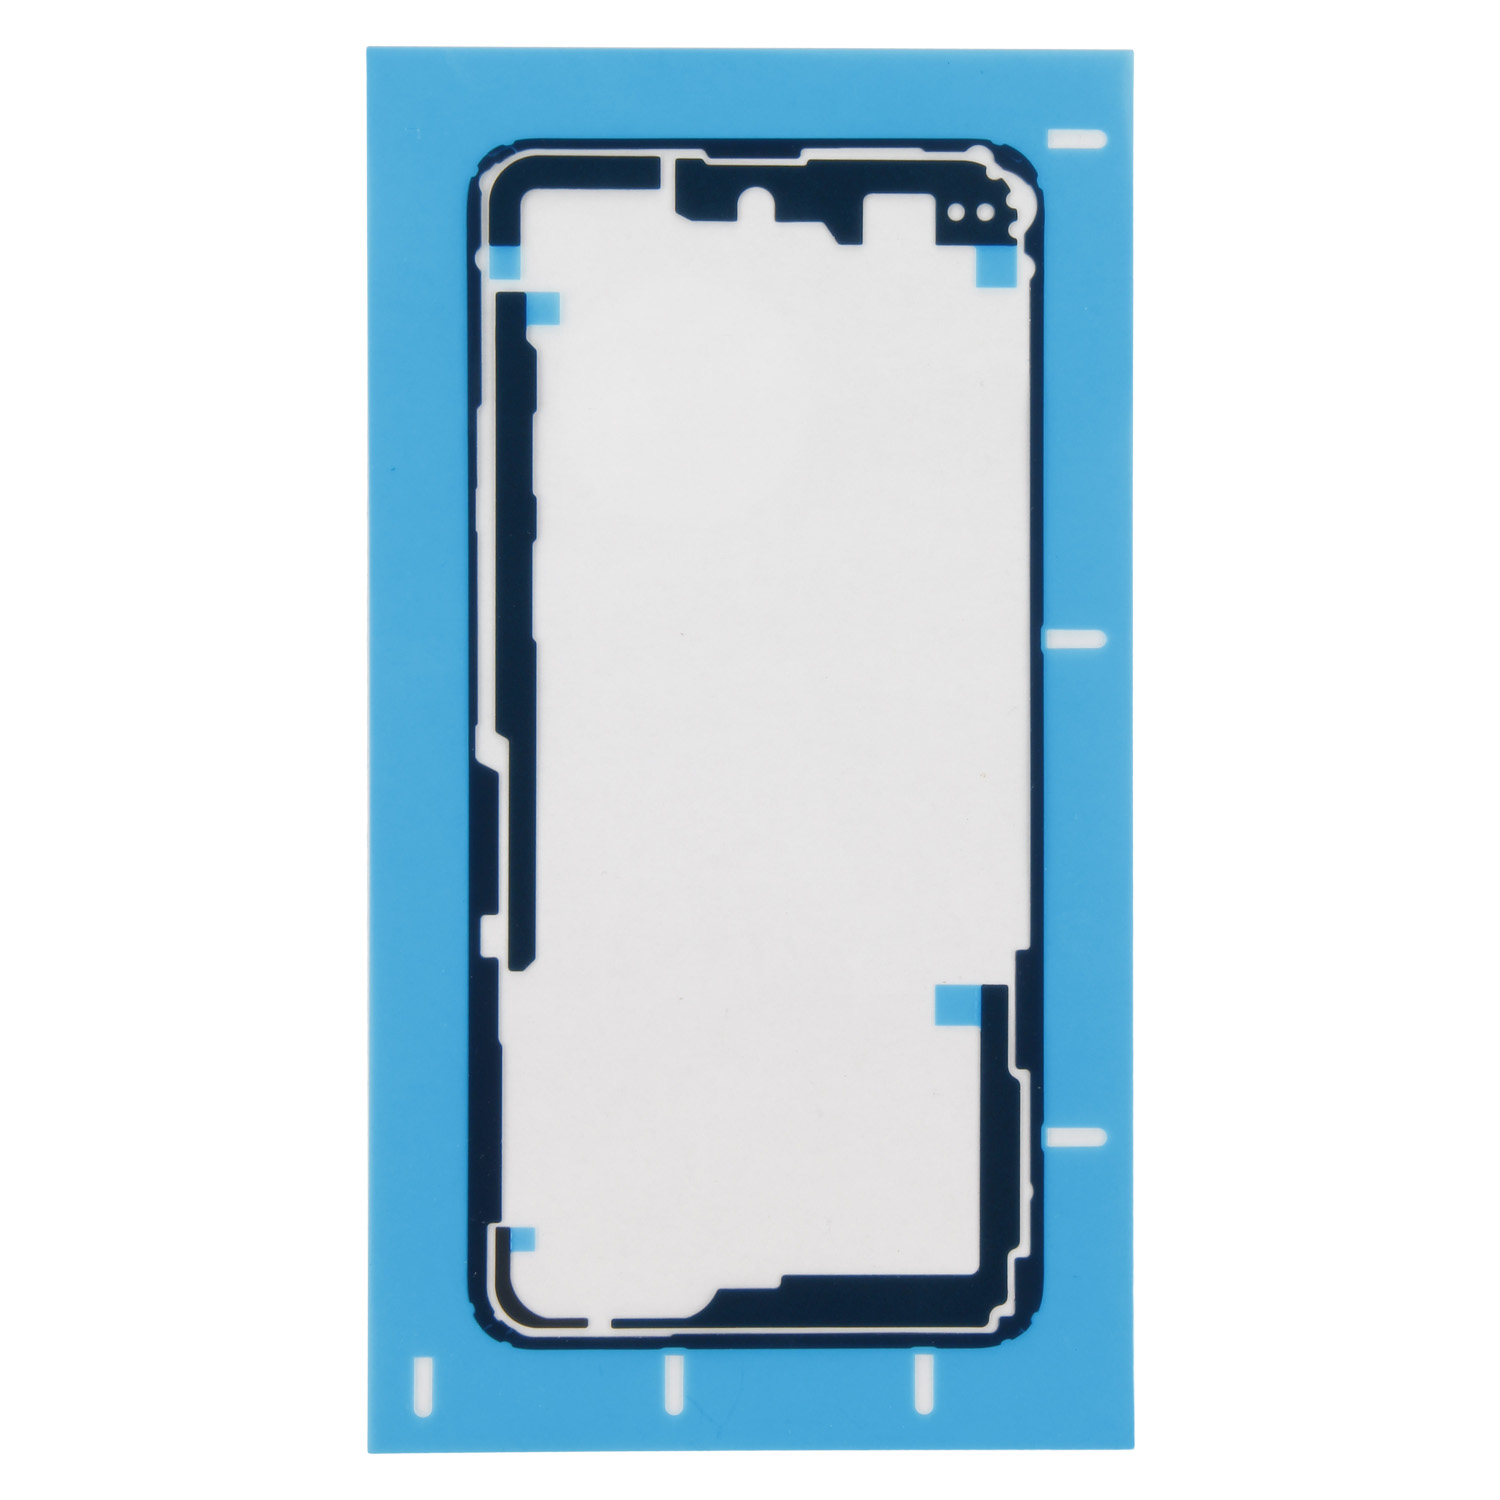 Huawei P40  (ANA-AN00, ANA-TN00) Battery Cover Adhesive Service Pack